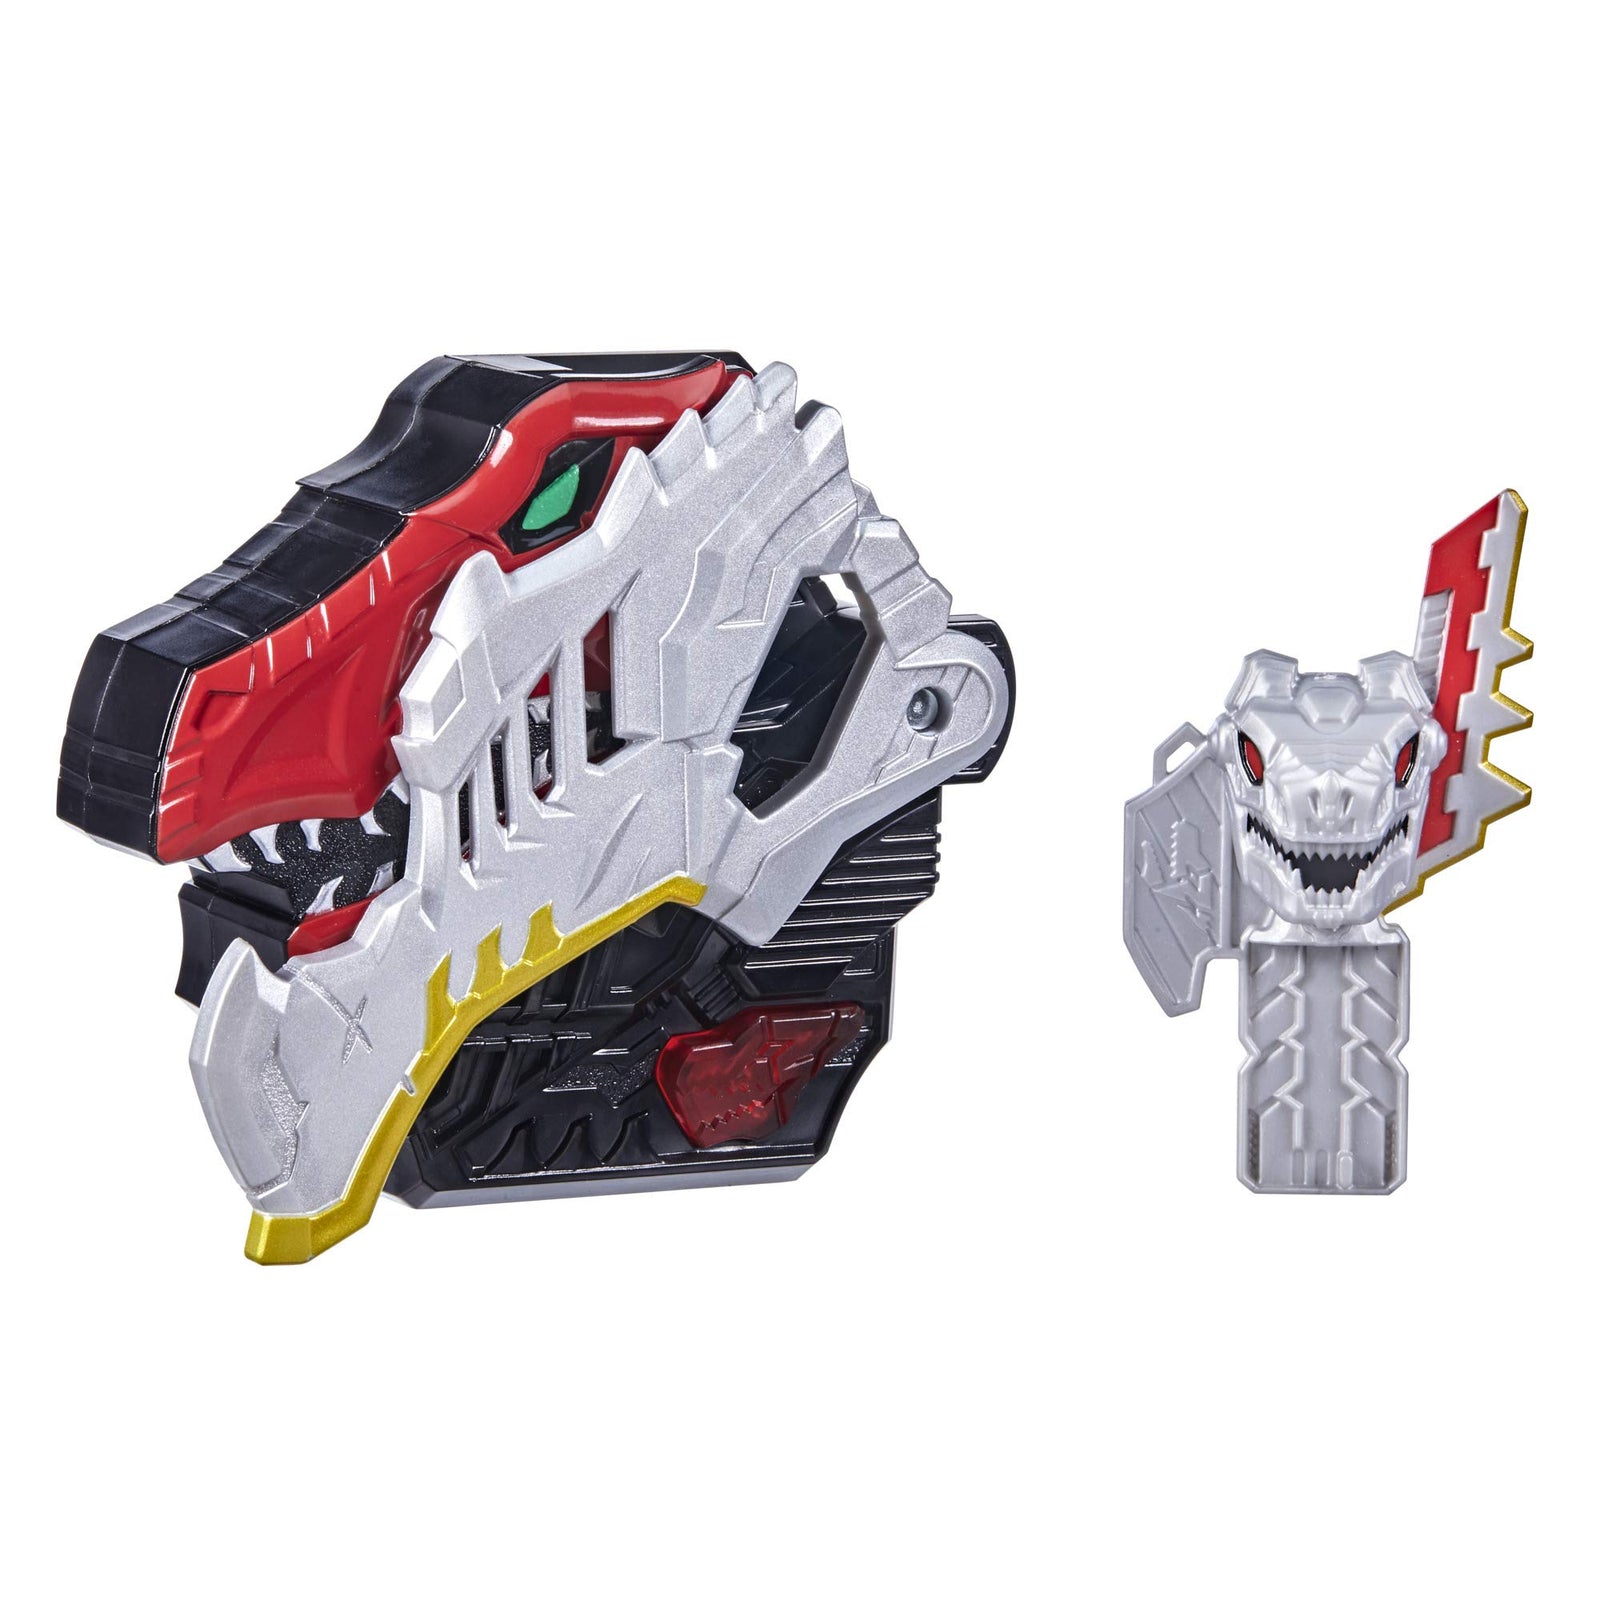 Power Rangers Dino Fury Morpher Electronic Toy with Lights and Sounds Includes Dino Fury Key Inspired TV Show Ages 5 and Up